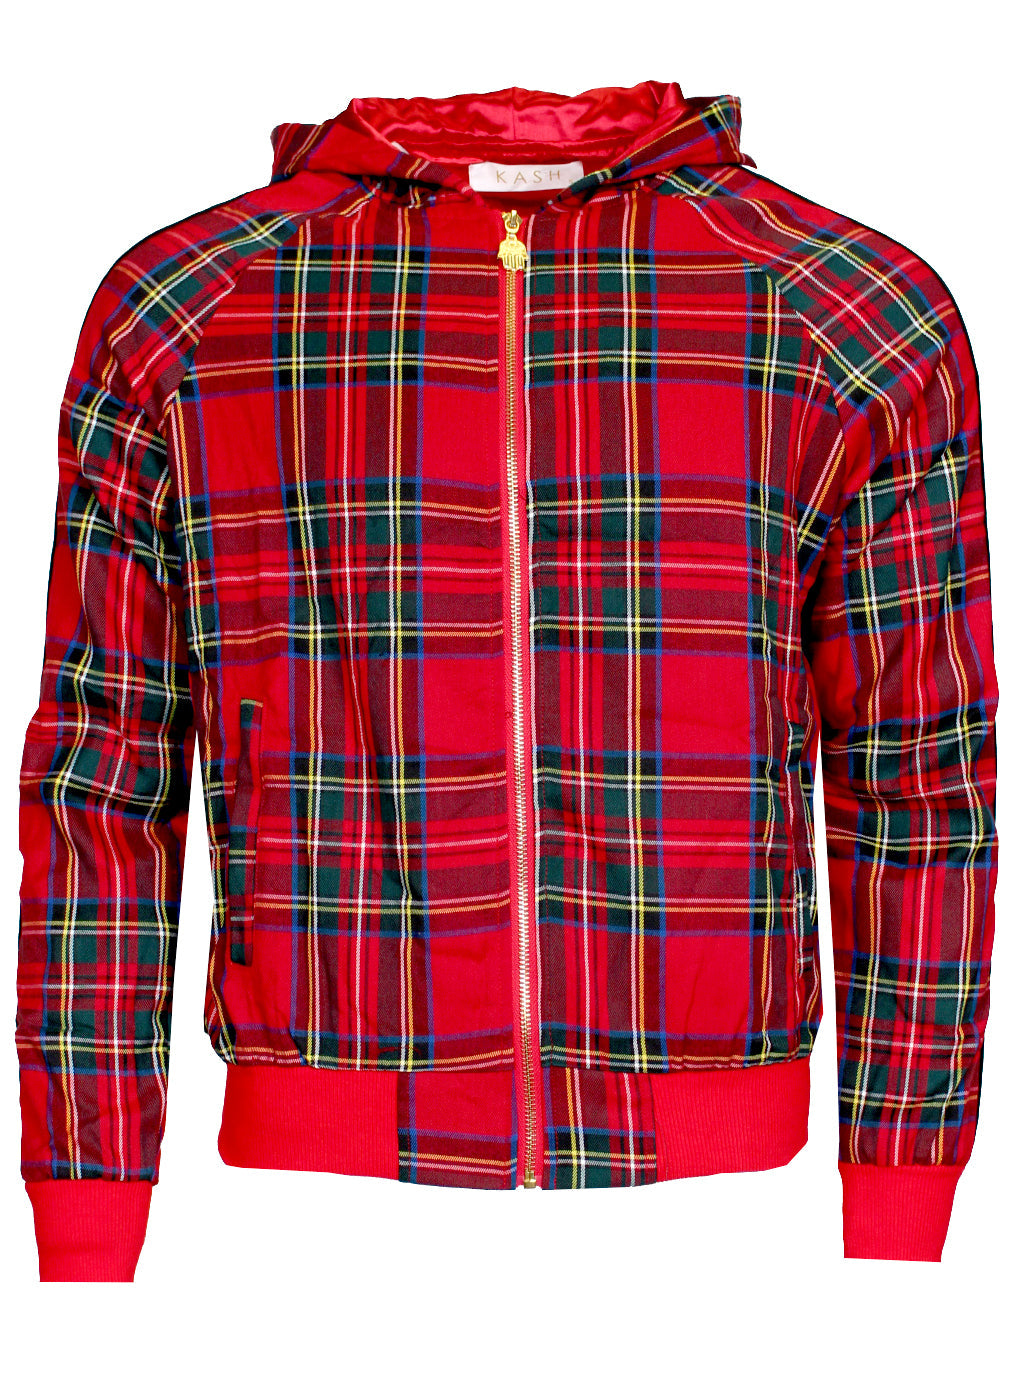 Men's Long Sleeve Plaid Track Jacket with Red and Black Stripes-Red